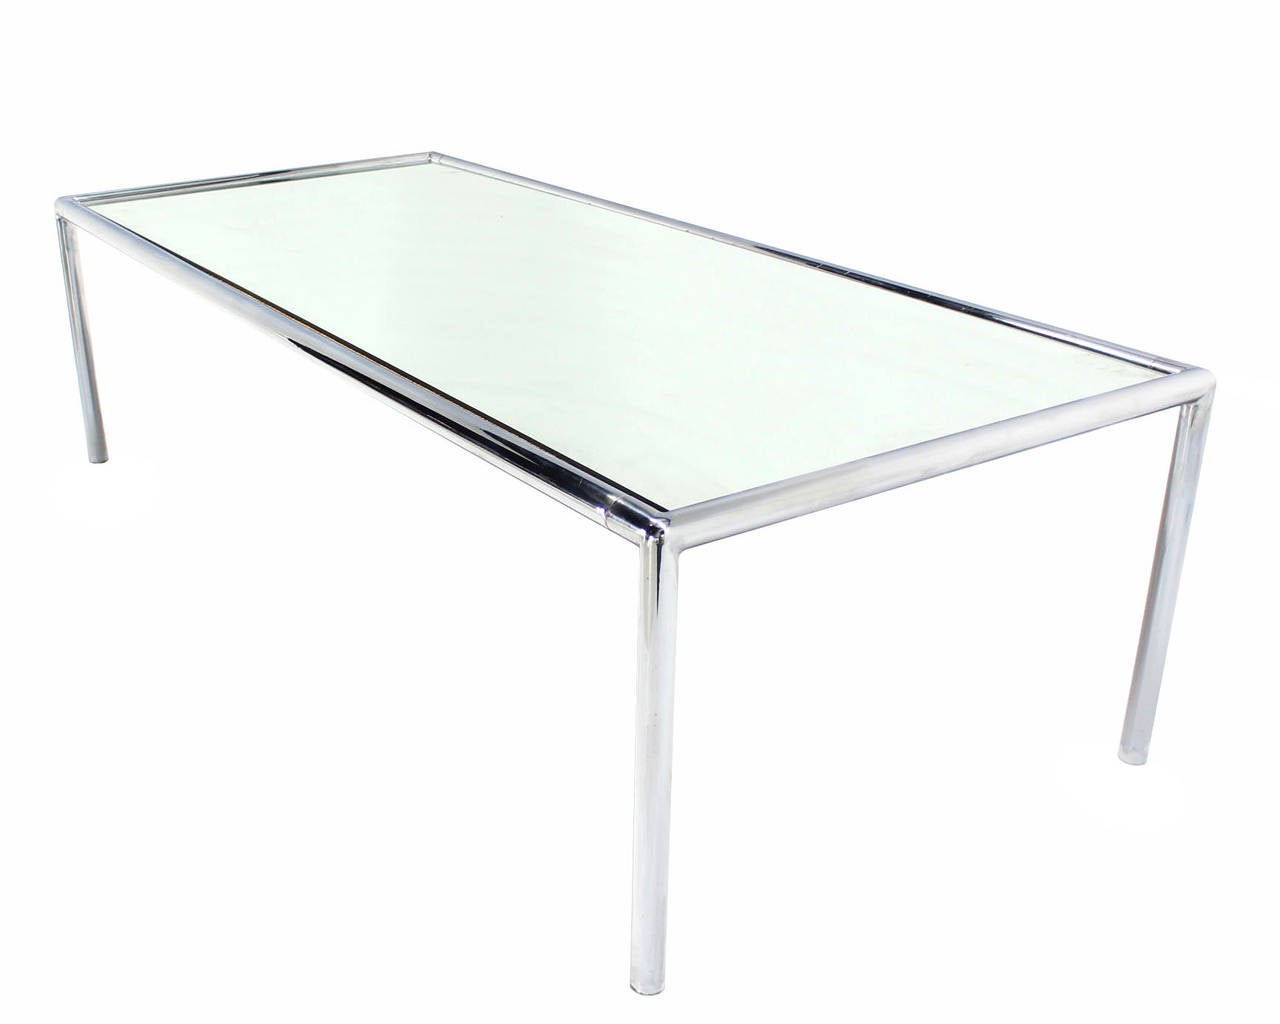 Polished Extra Long Chrome Tubular Design Dining or Conference Table w/ Mirrored Top